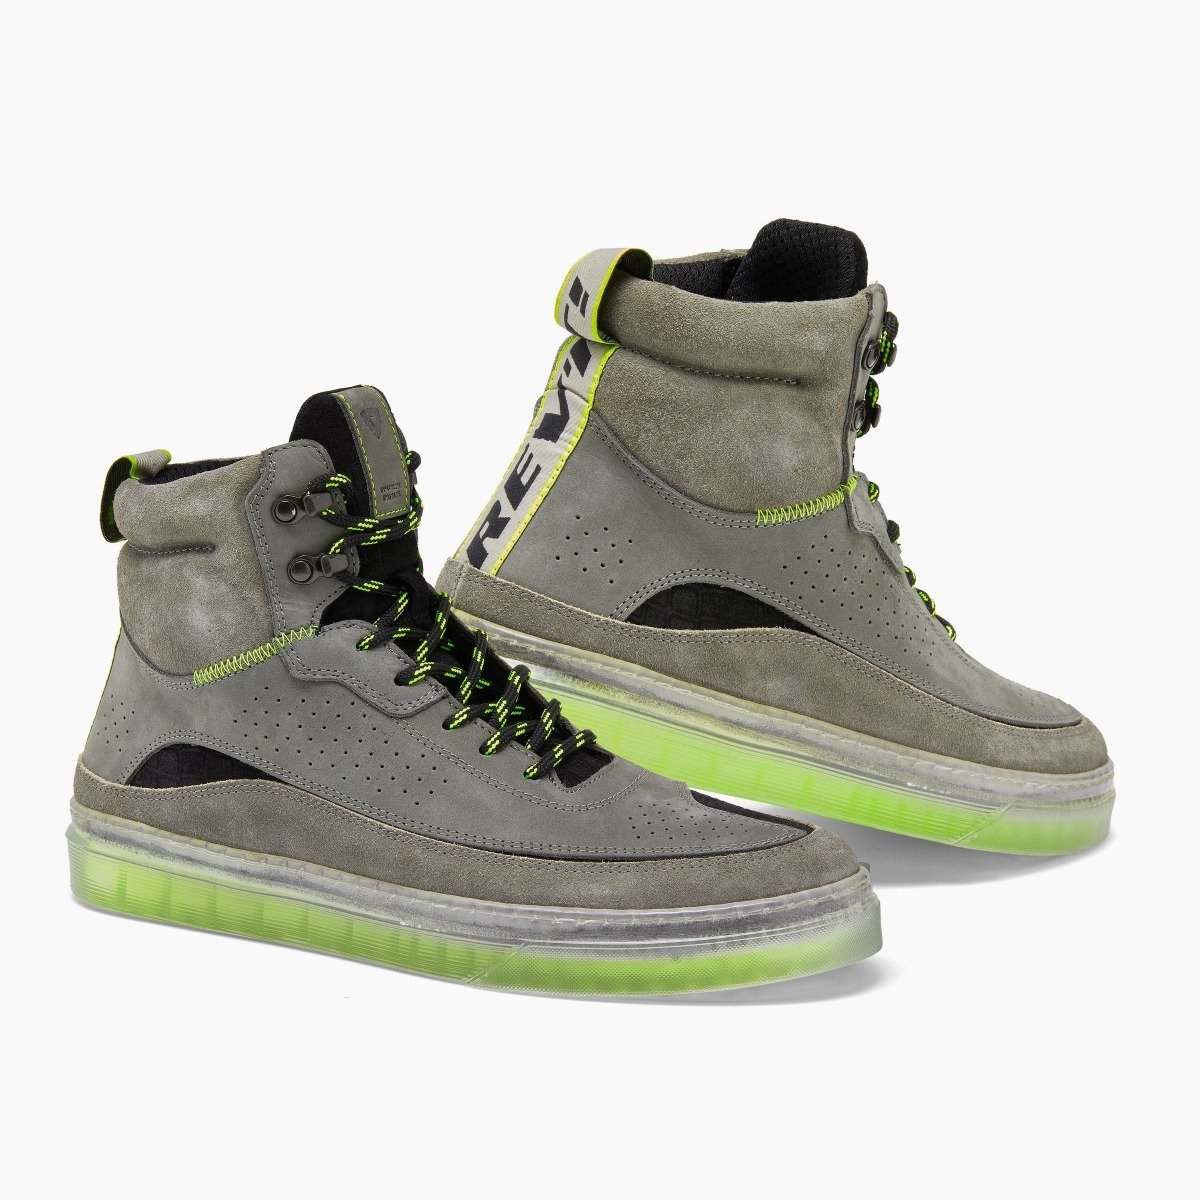 Image of REV'IT! Filter Gray Neon Yellow Motorcycle Shoes Talla 45